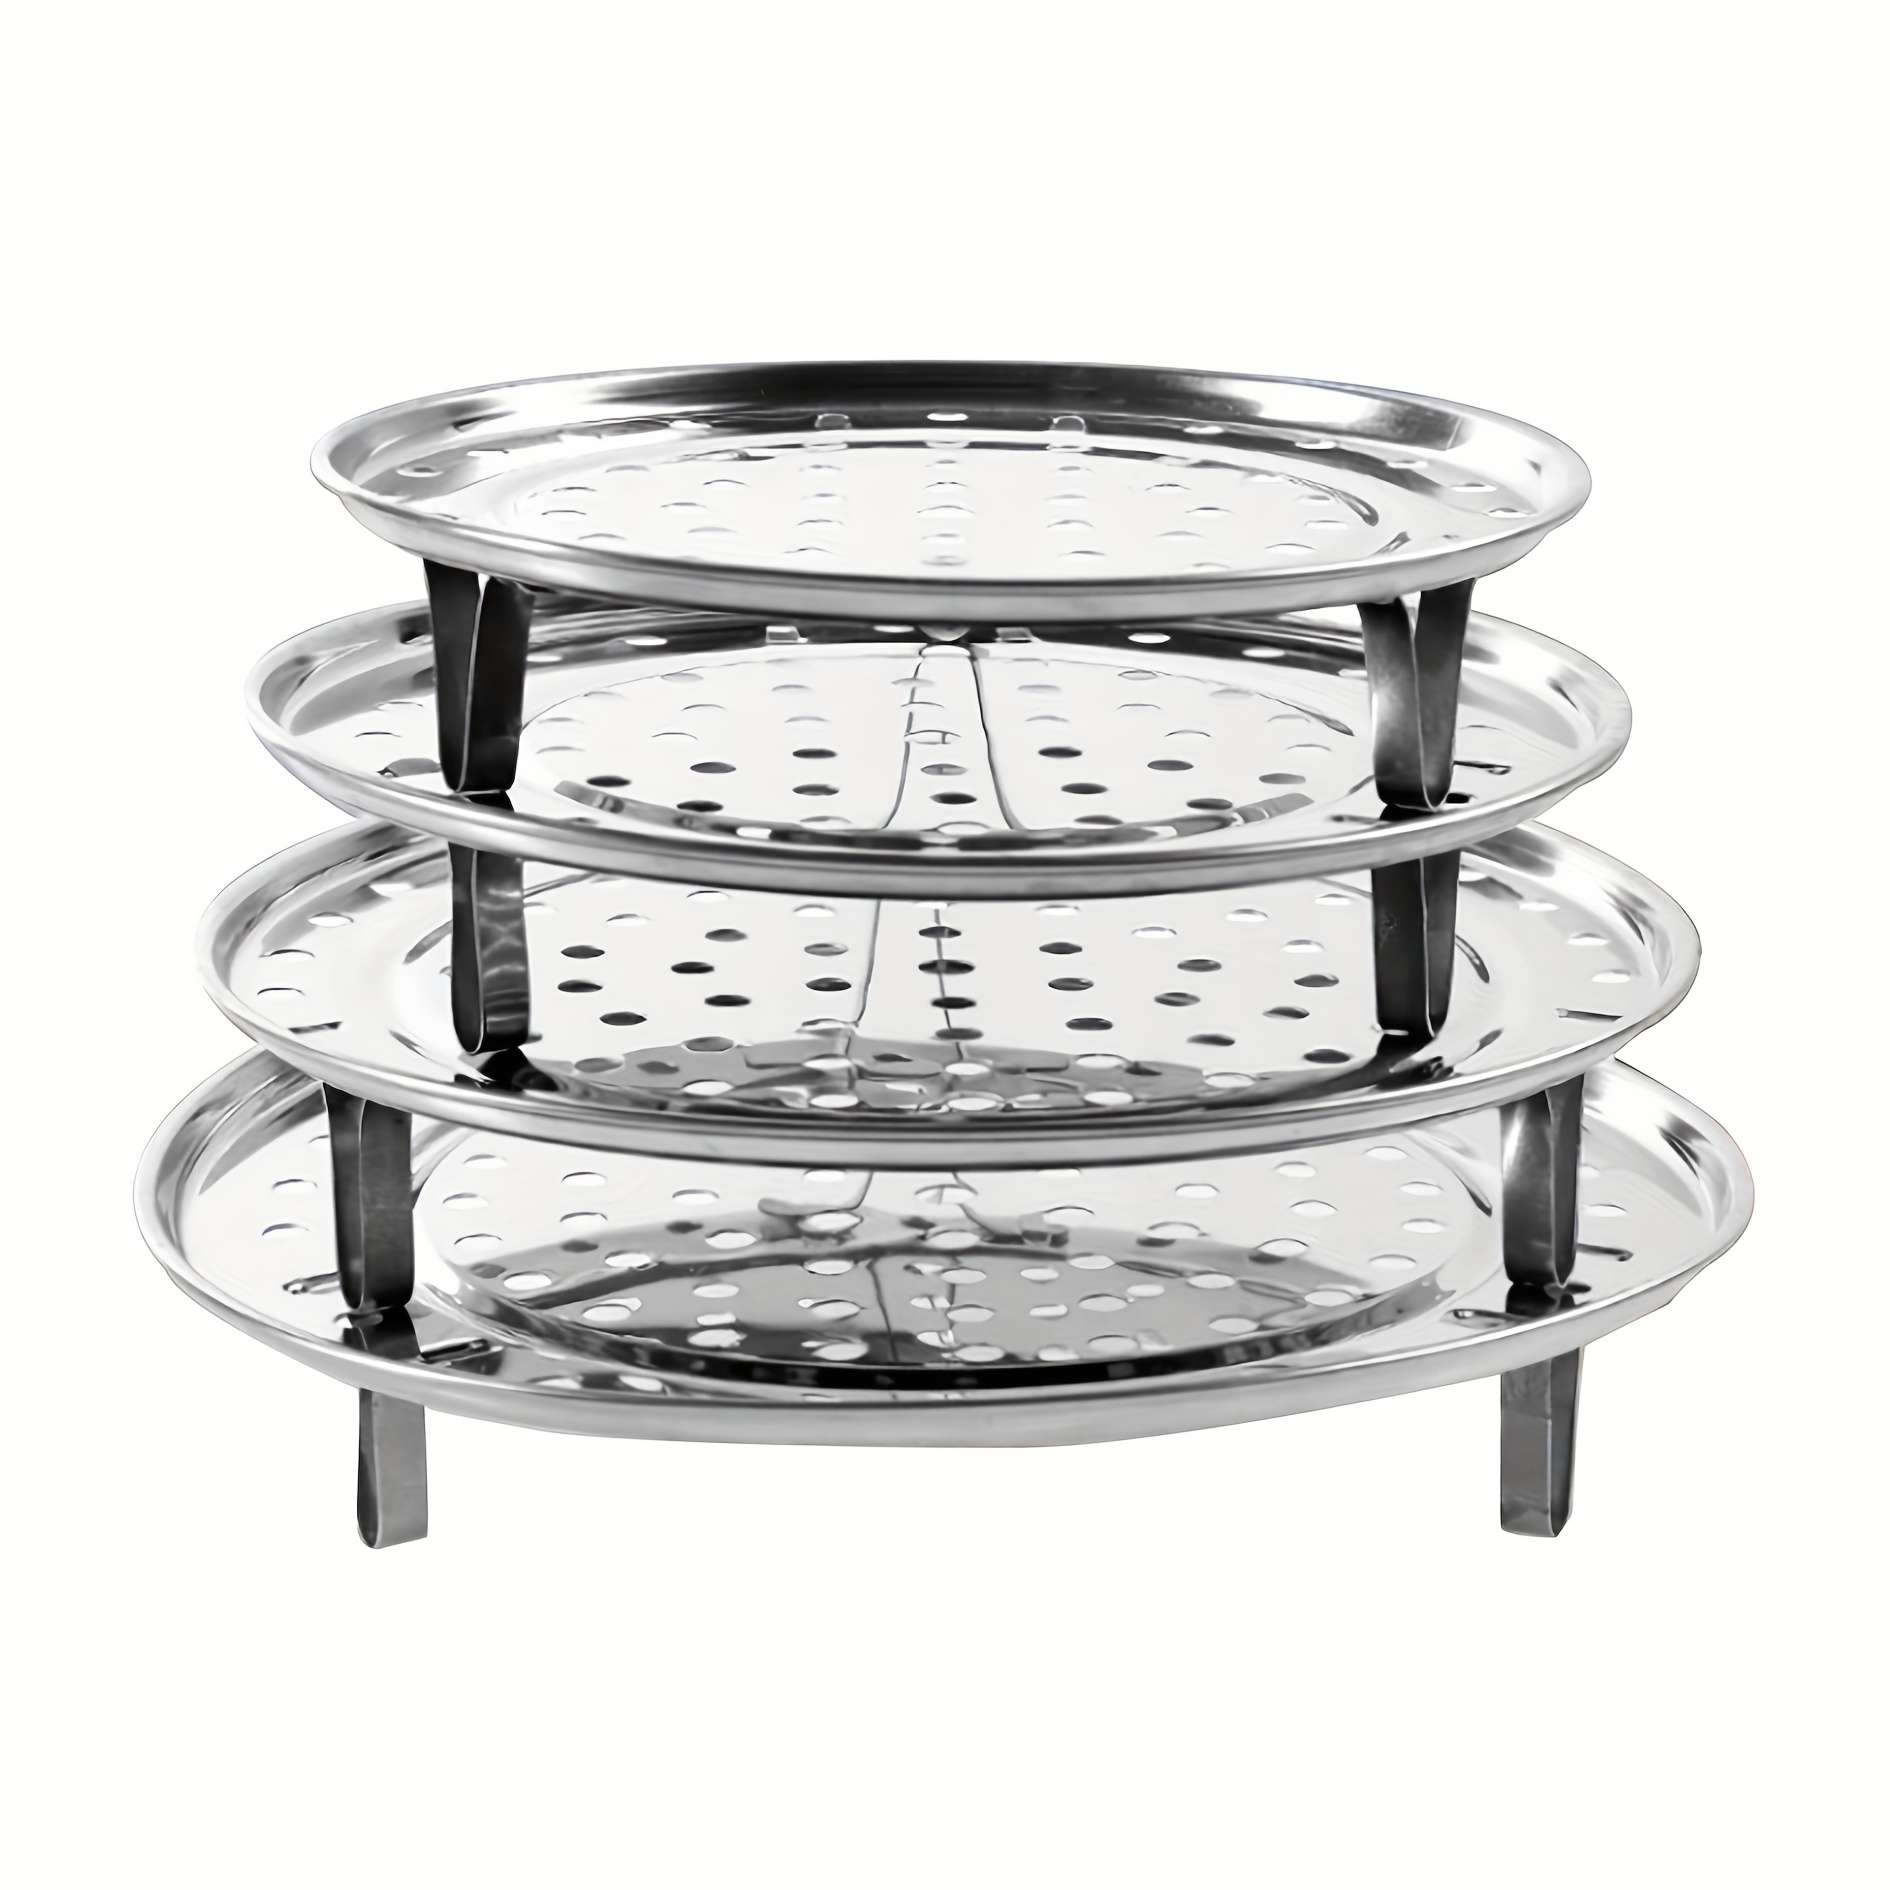 1pc Steamer Rack Round Stainless Steel Rack Steaming Stand Canner